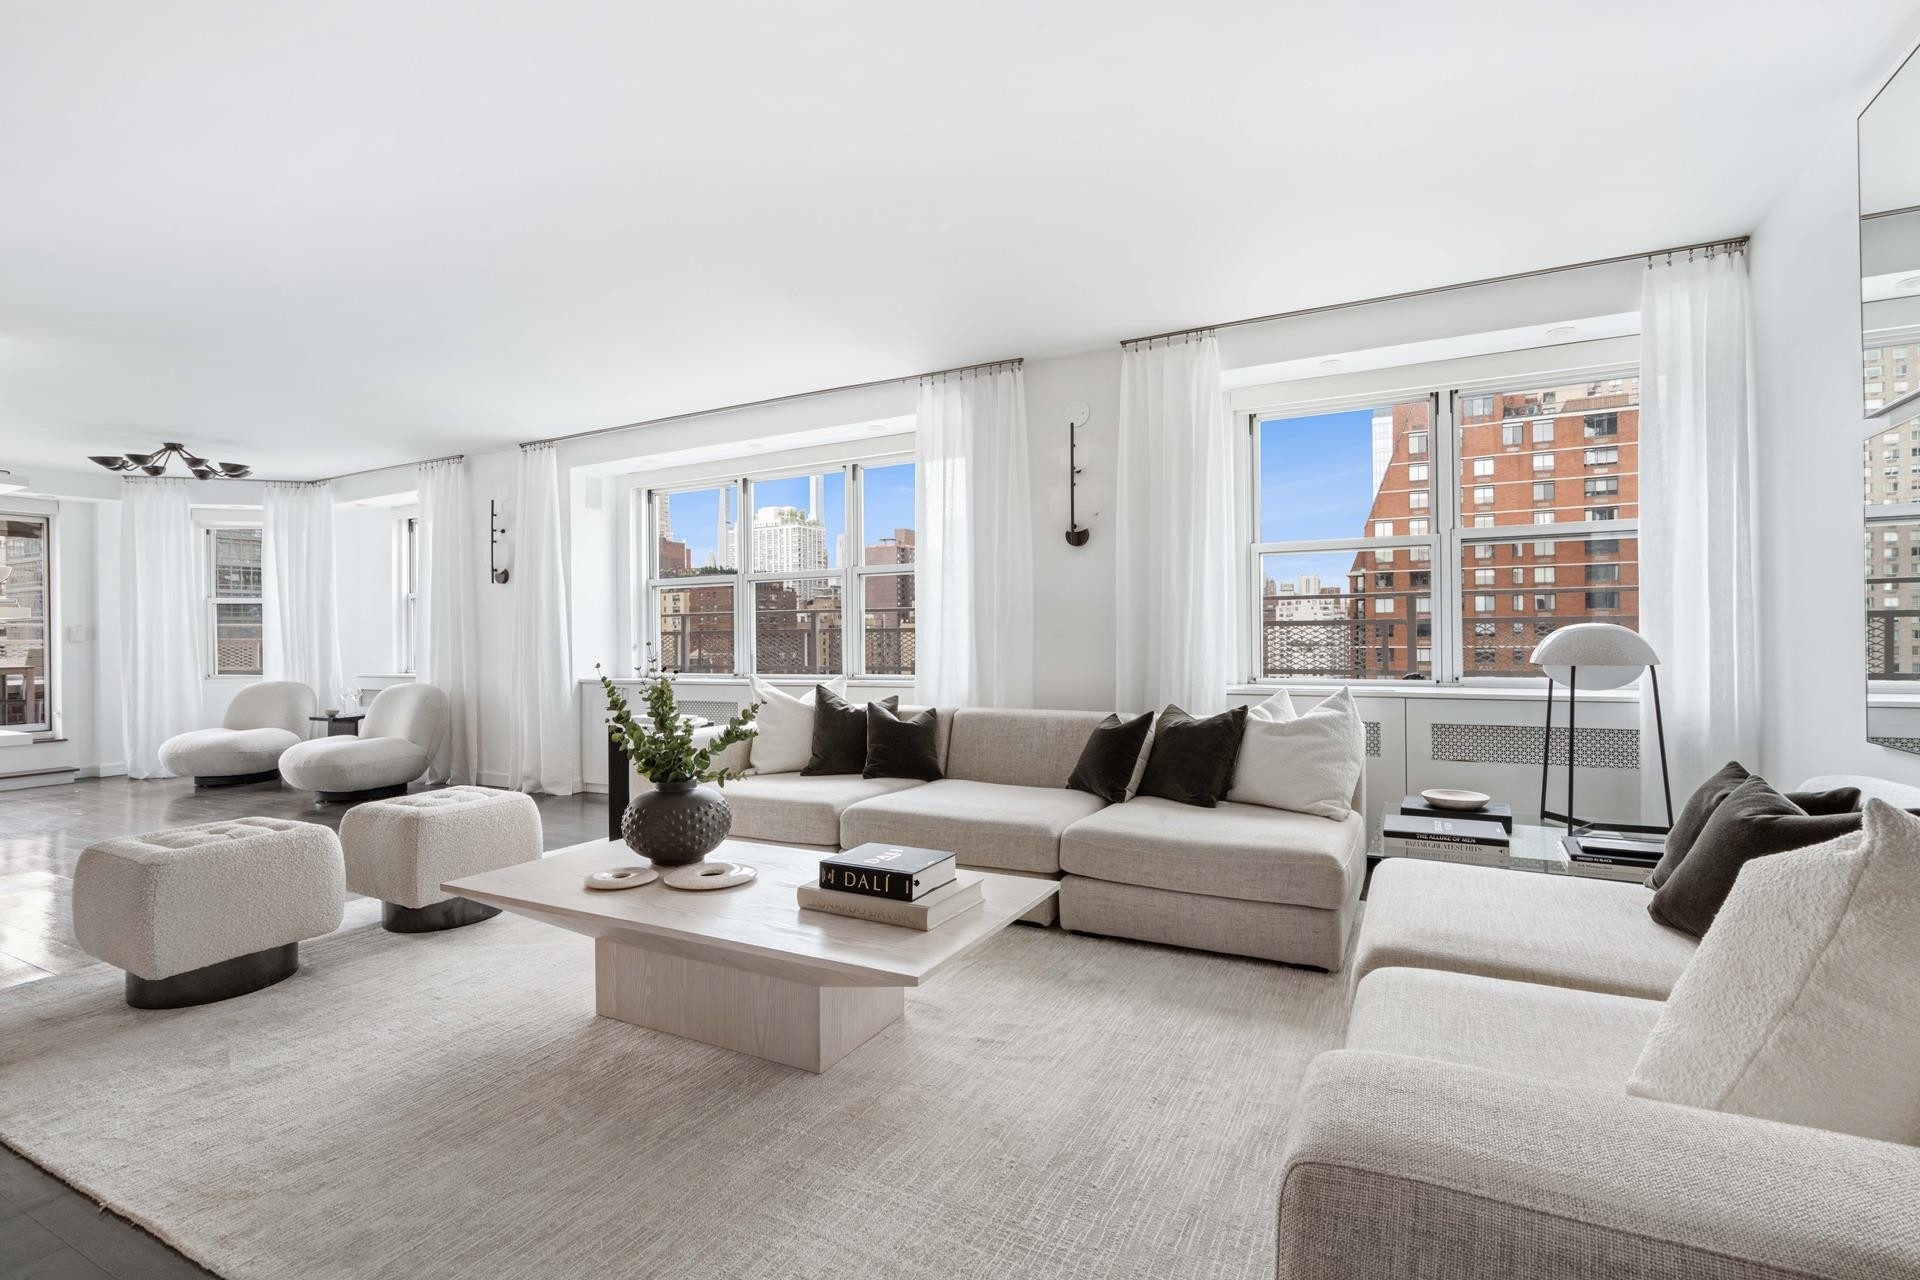 Co-op Properties for Sale at The Amherst, 401 E 74TH ST, PHH Lenox Hill, New York, New York 10021